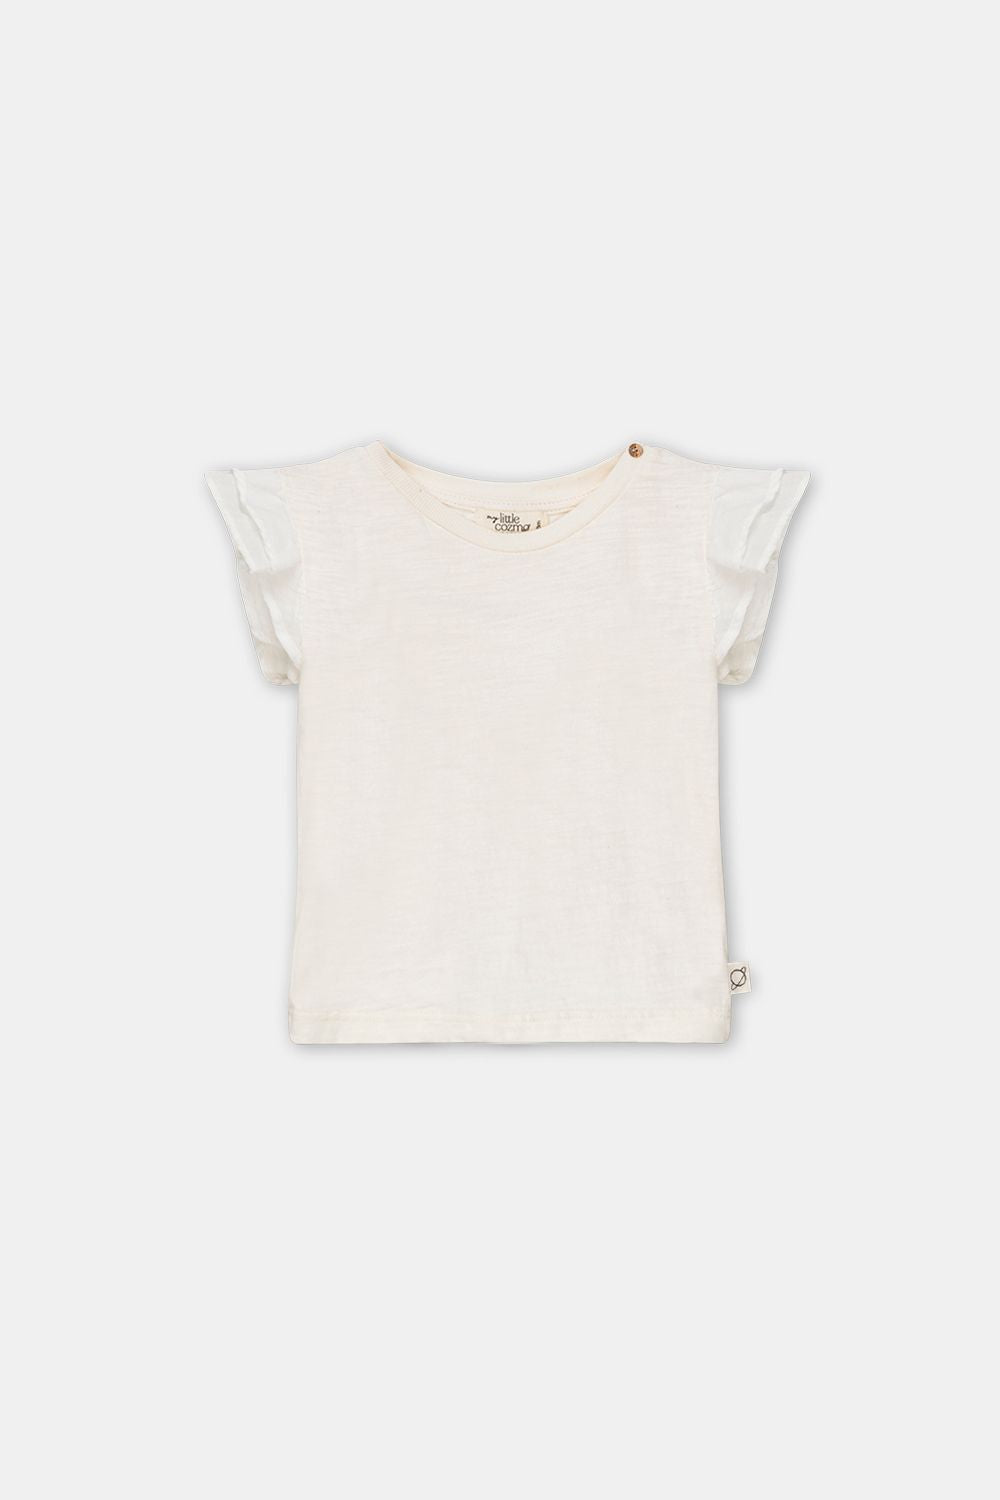 My Little cozmo - REESE205 - frill t-shirt - ivory